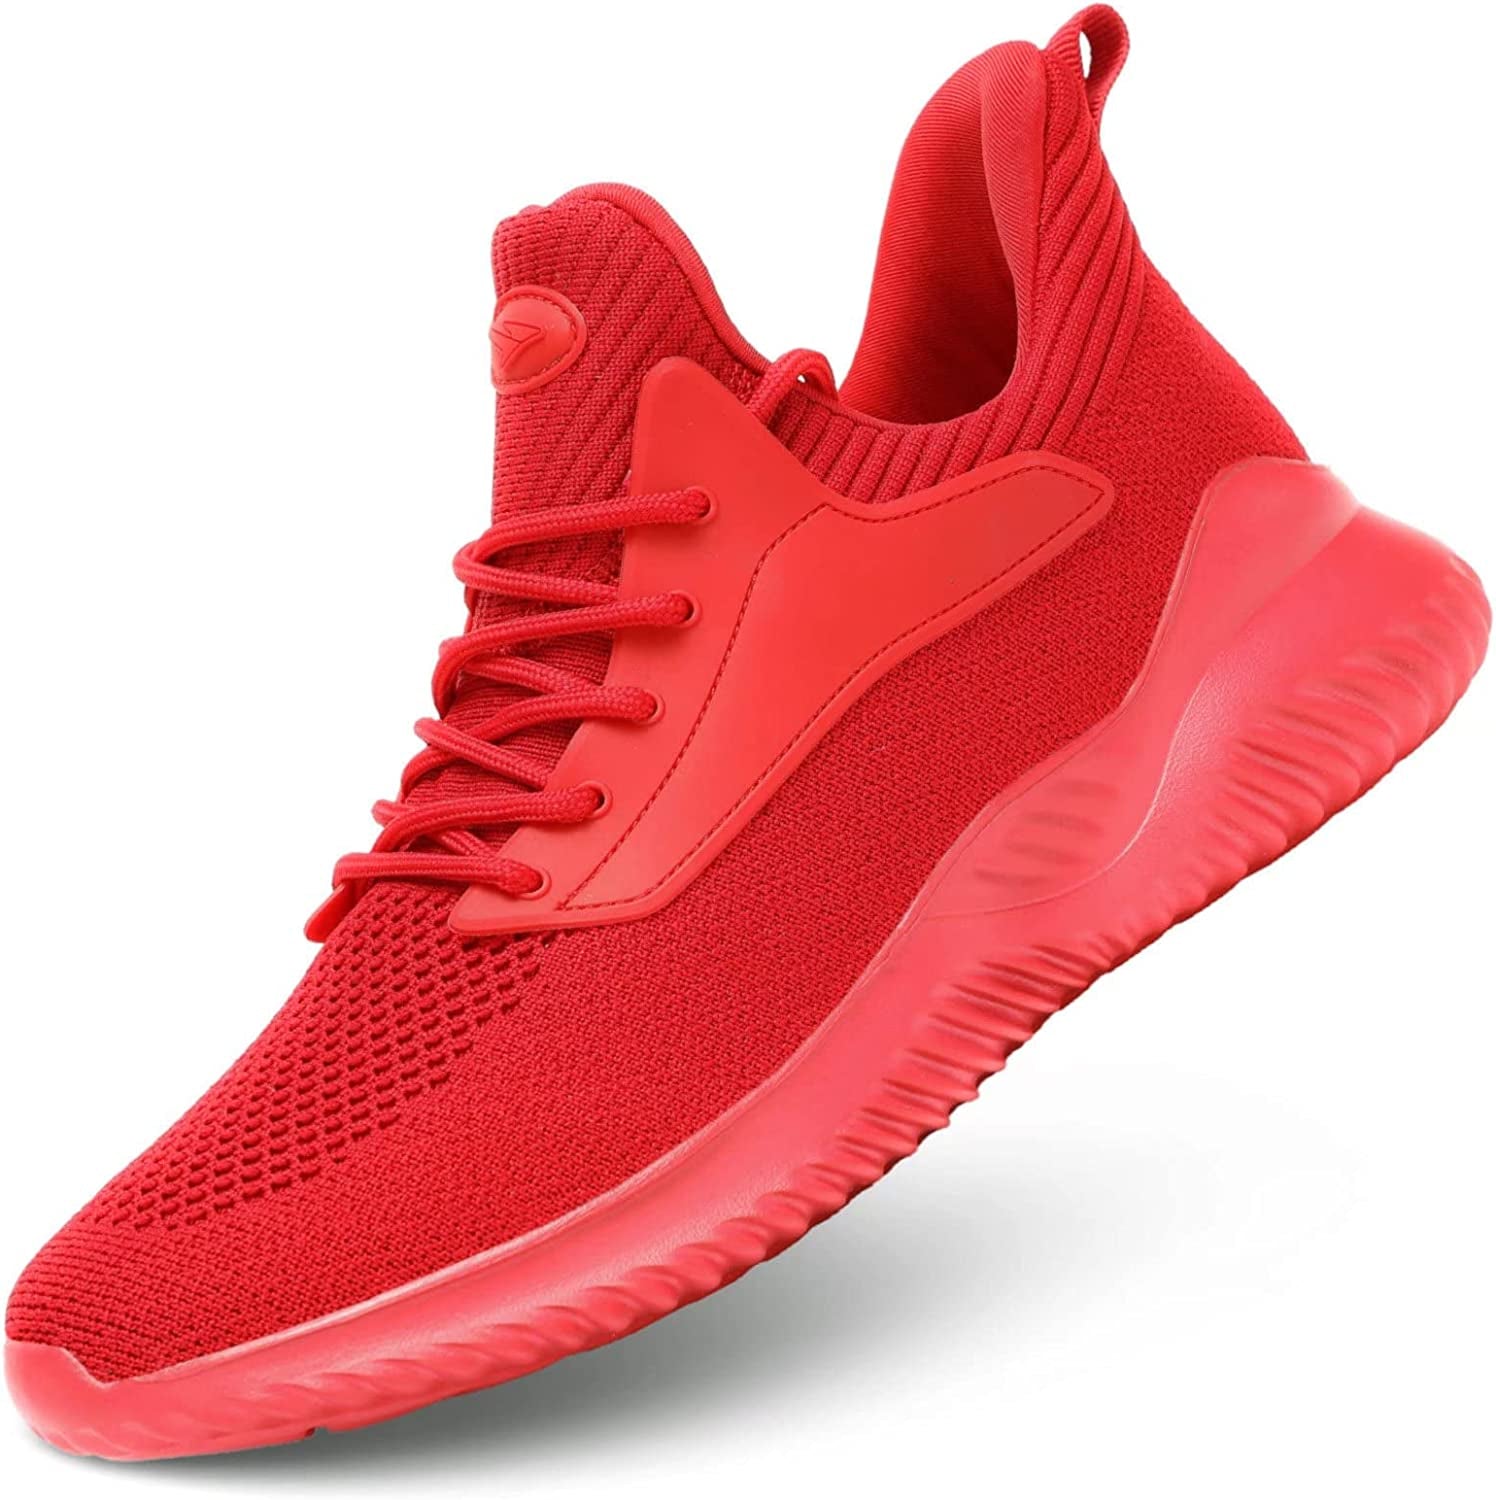 Mens Running Shoes Slip on Casual Athletic Sport Sneakers Tennis Walking Work Shoes Travel Indoor Outdoor Gym Trainers